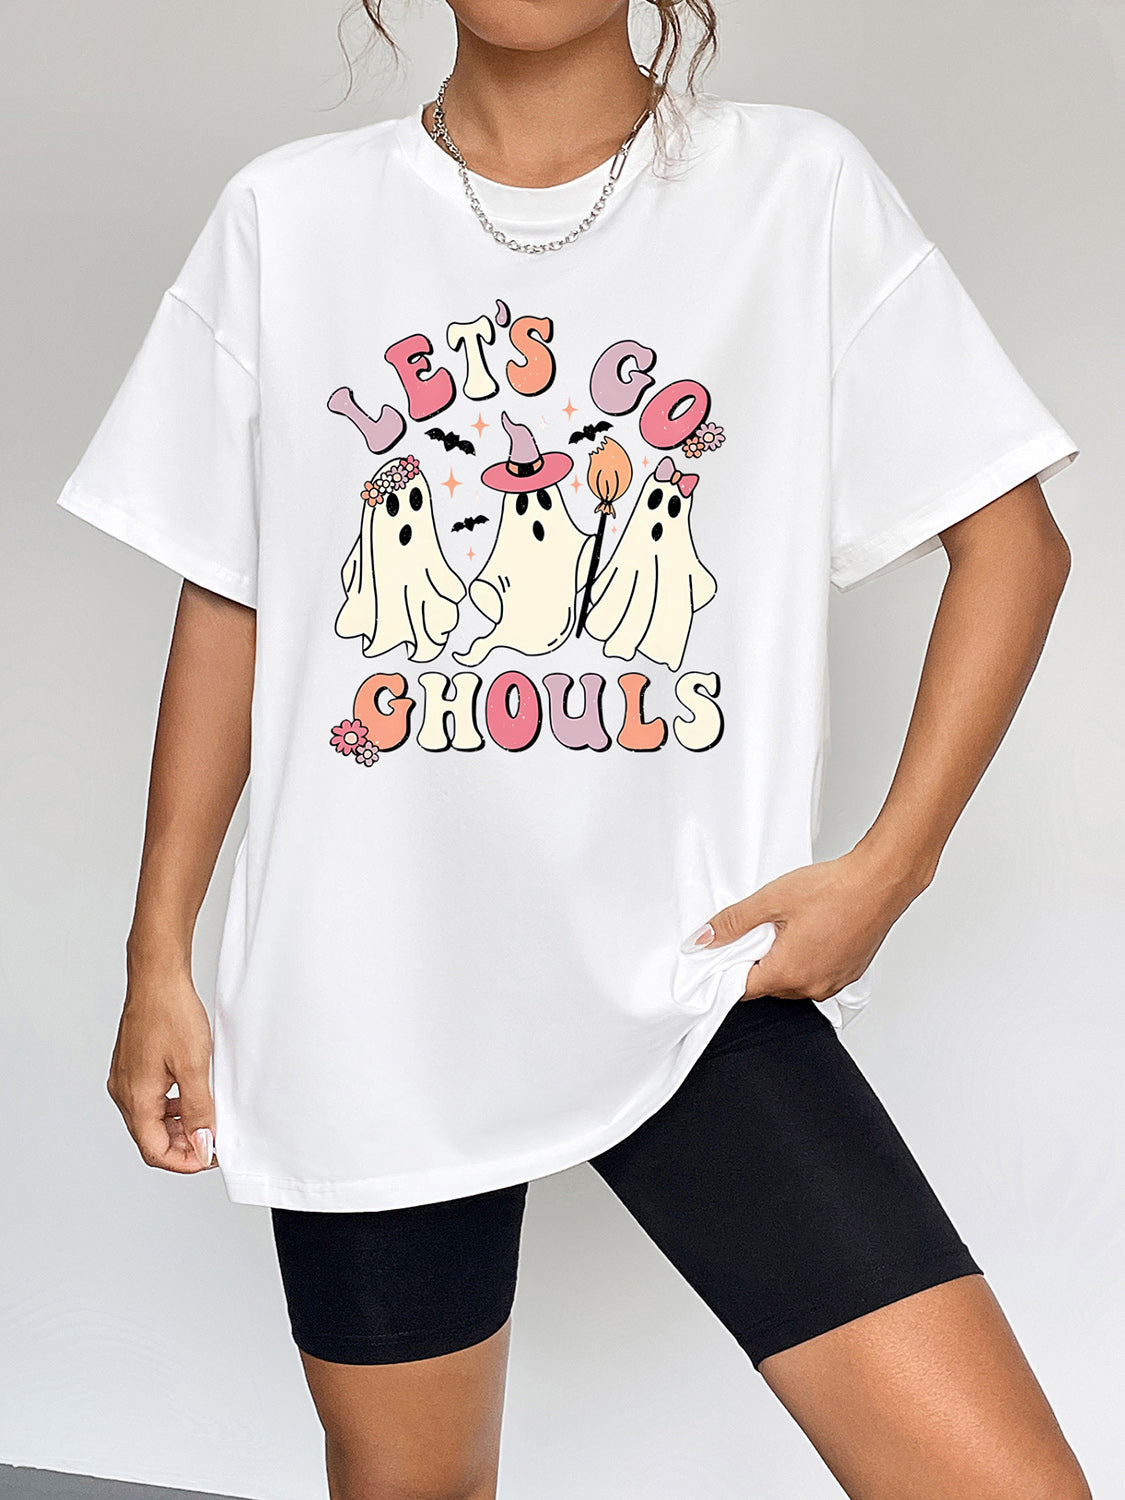 LET'S GO GHOULS Graphic Tee